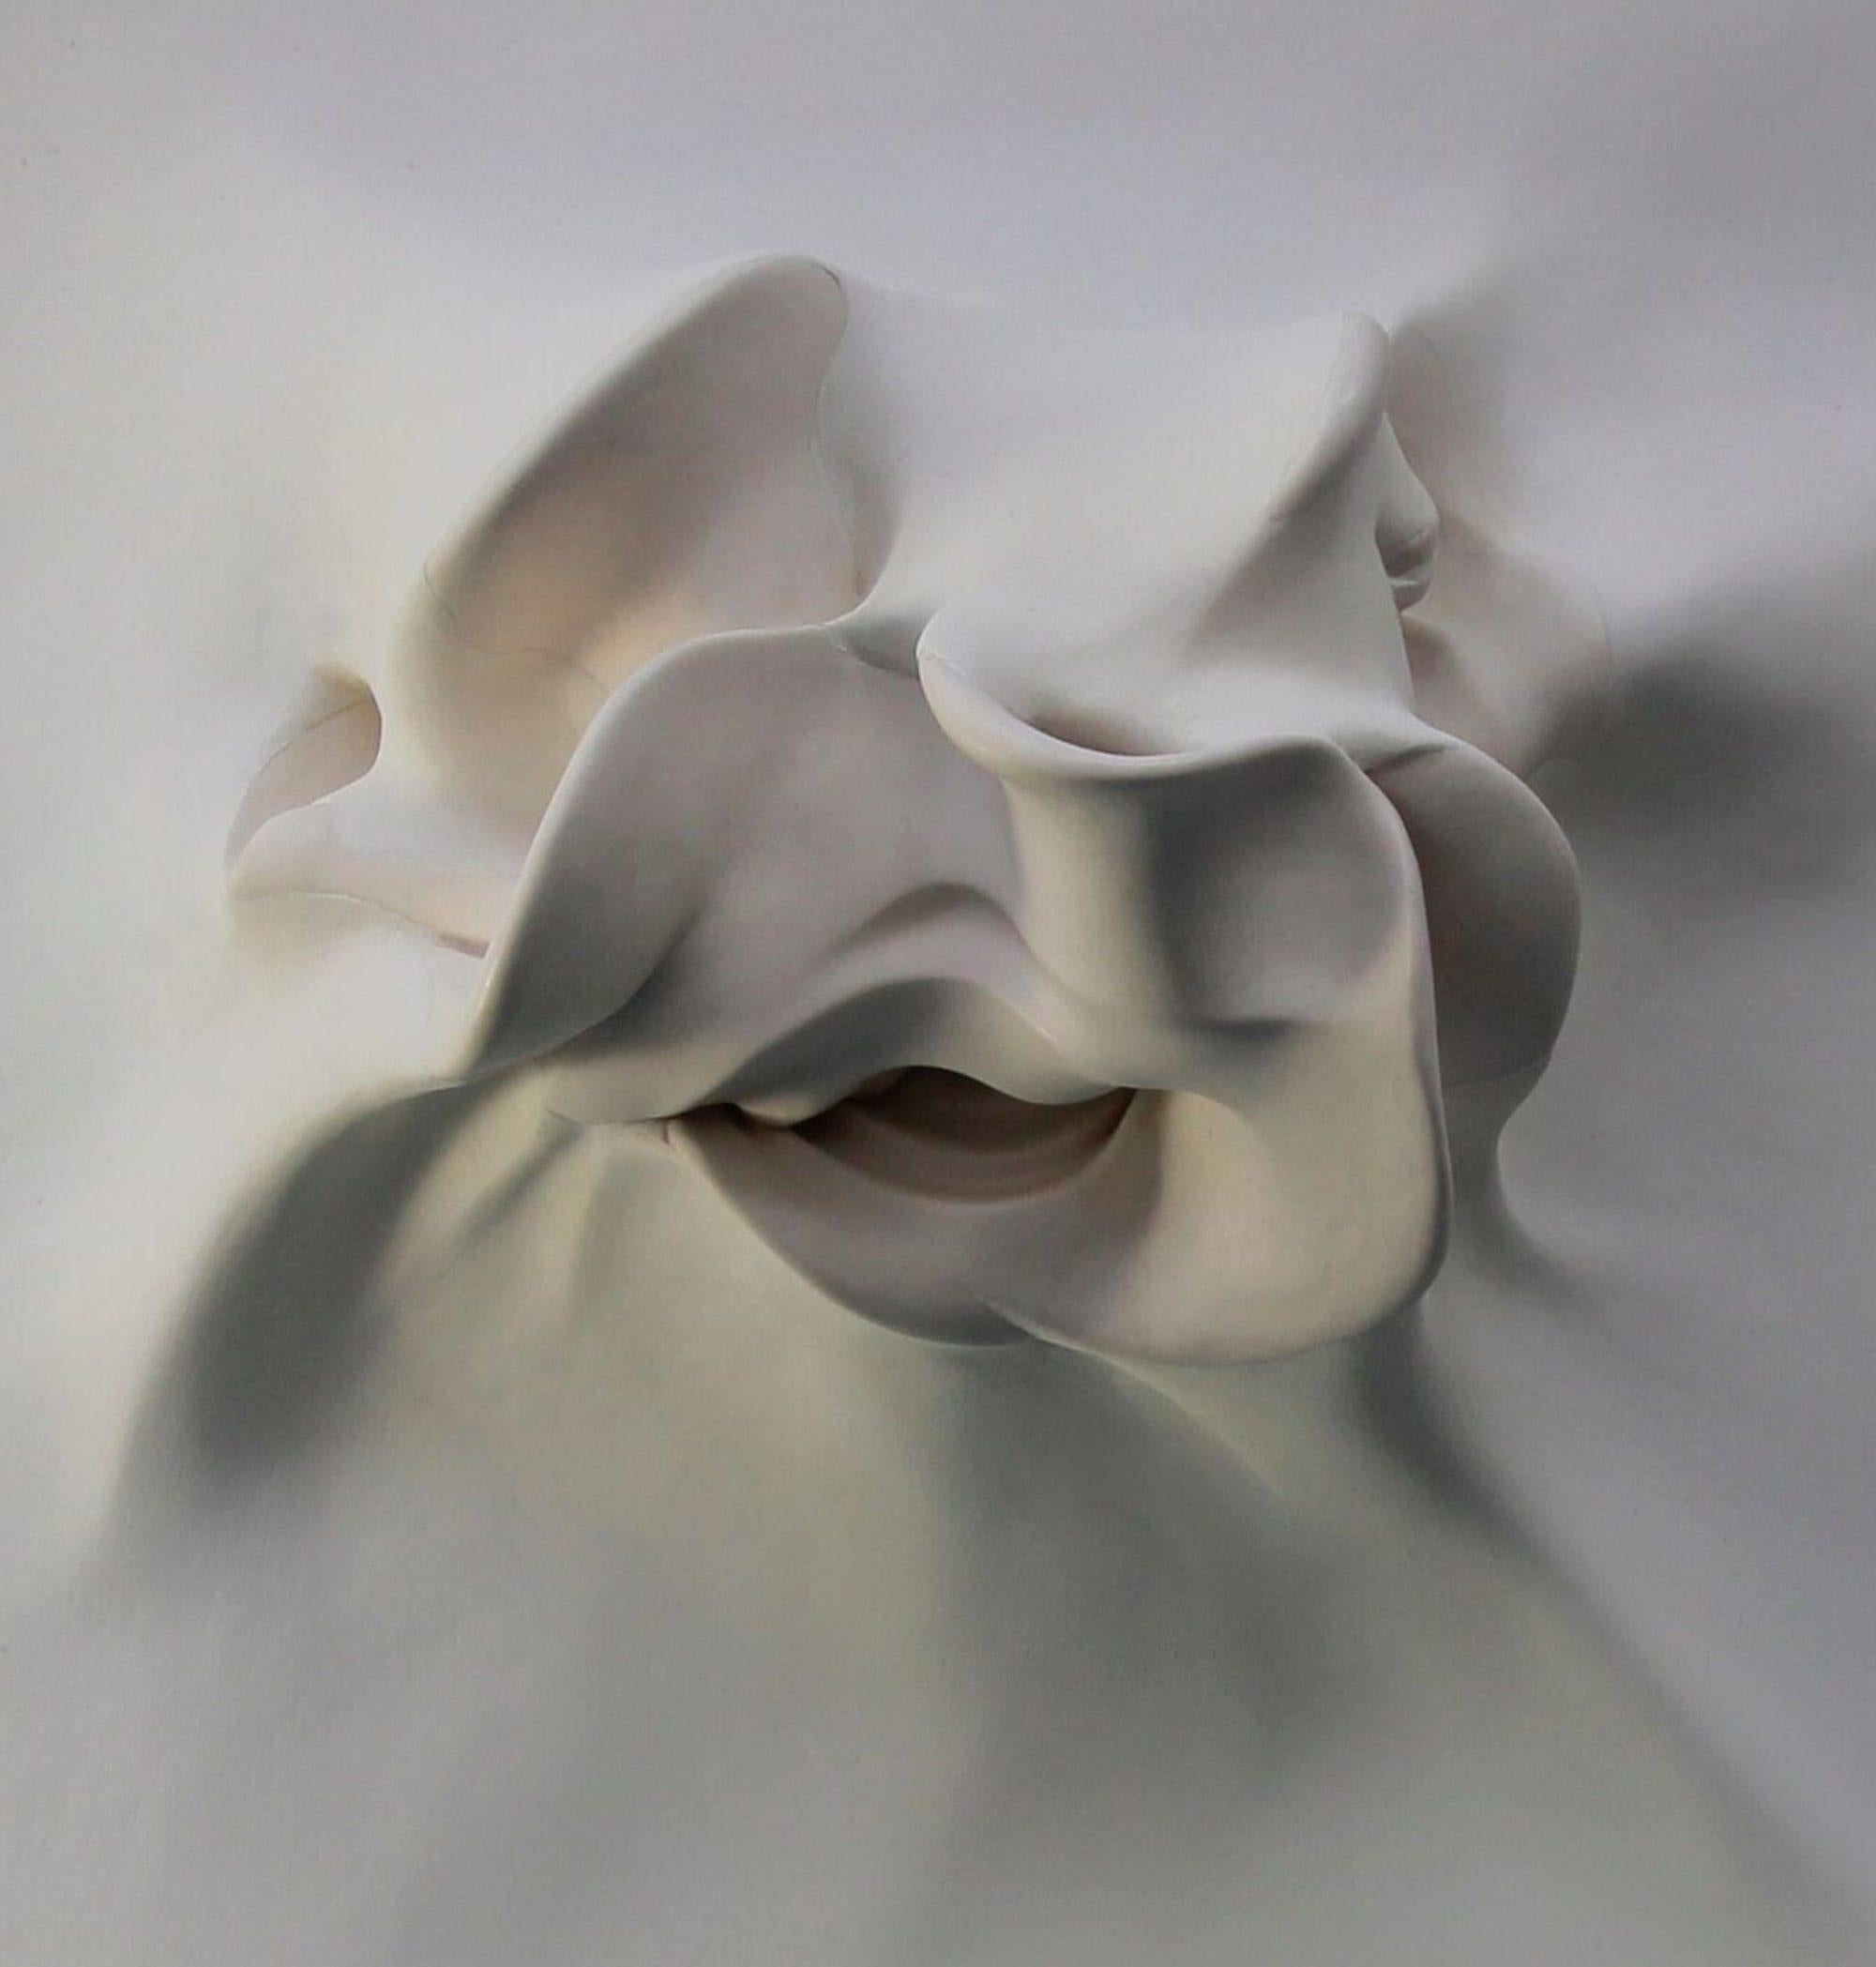 Emergence 2 by Sharon Brill - Wall sculpture, mixed media, white ceramic, square For Sale 4